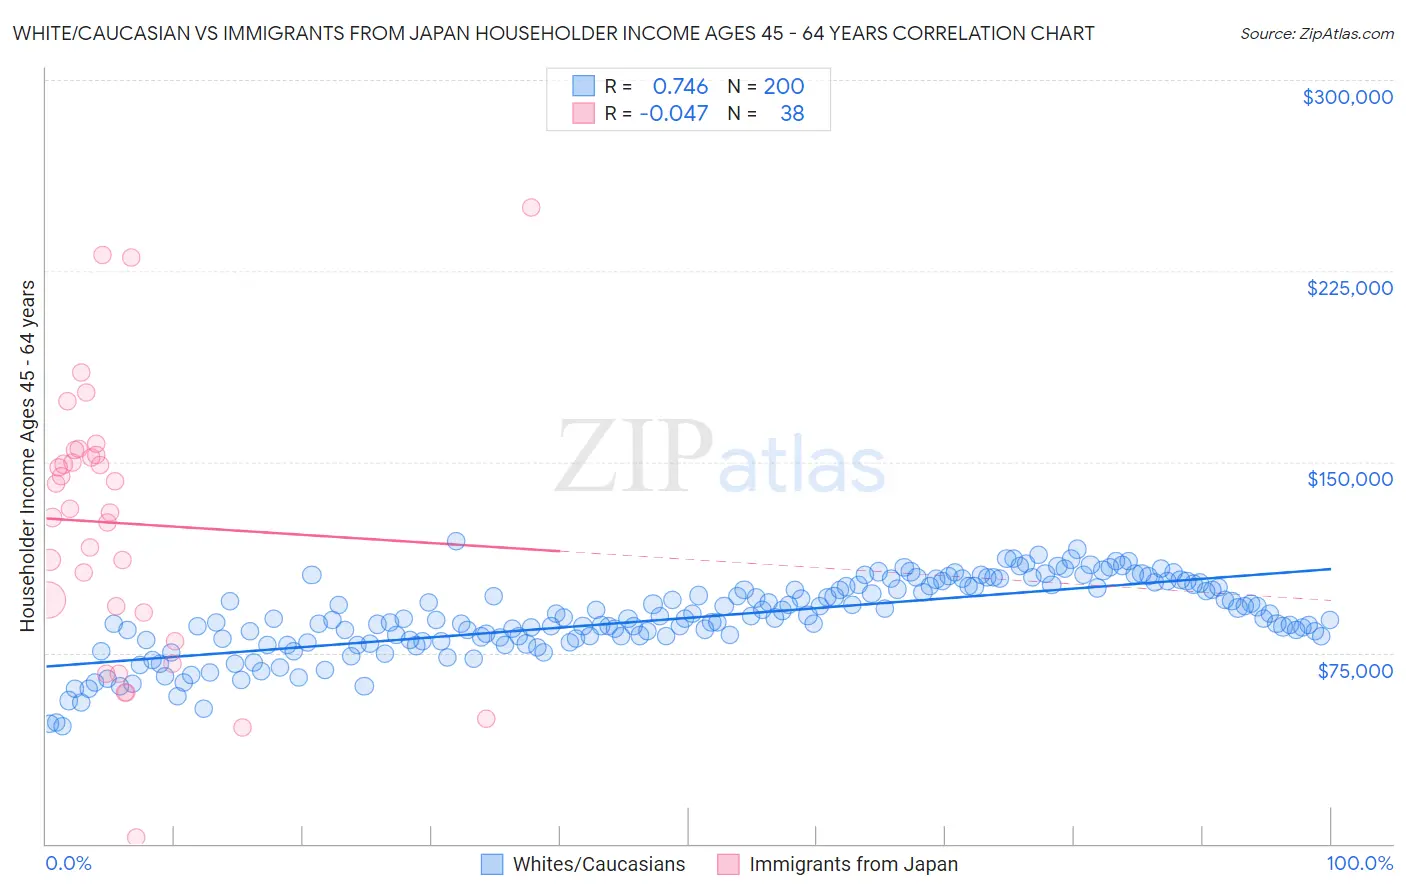 White/Caucasian vs Immigrants from Japan Householder Income Ages 45 - 64 years